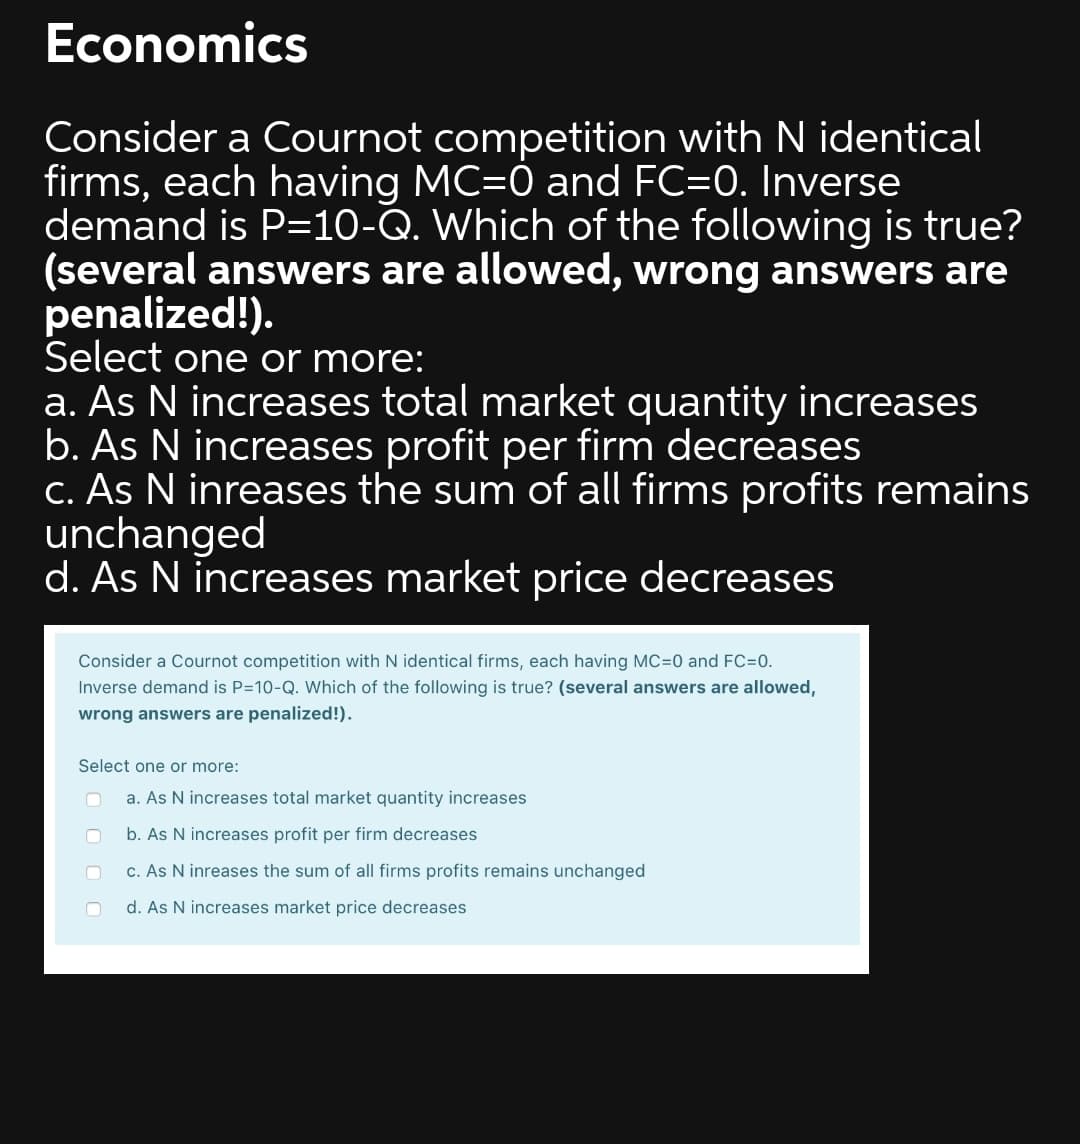 Economics
Consider a Cournot competition with N identical
firms, each having MC=0 and FC=0. Inverse
demand is P=10-Q. Which of the following is true?
(several answers are allowed, wrong answers are
penalized!).
Select one or more:
a. As N increases total market quantity increases
b. As N increases profit per firm decreases
C. As N inreases the sum of all firms profits remains
unchanged
d. As N increases market price decreases
Consider a Cournot competition with N identical firms, each having MC=0 and FC=0.
Inverse demand is P=10-Q. Which of the following is true? (several answers are allowed,
wrong answers are penalized!).
Select one or more:
a. As N increases total market quantity increases
b. As N increases profit per firm decreases
c. As N inreases the sum of all firms profits remains unchanged
d. As N increases market price decreases
